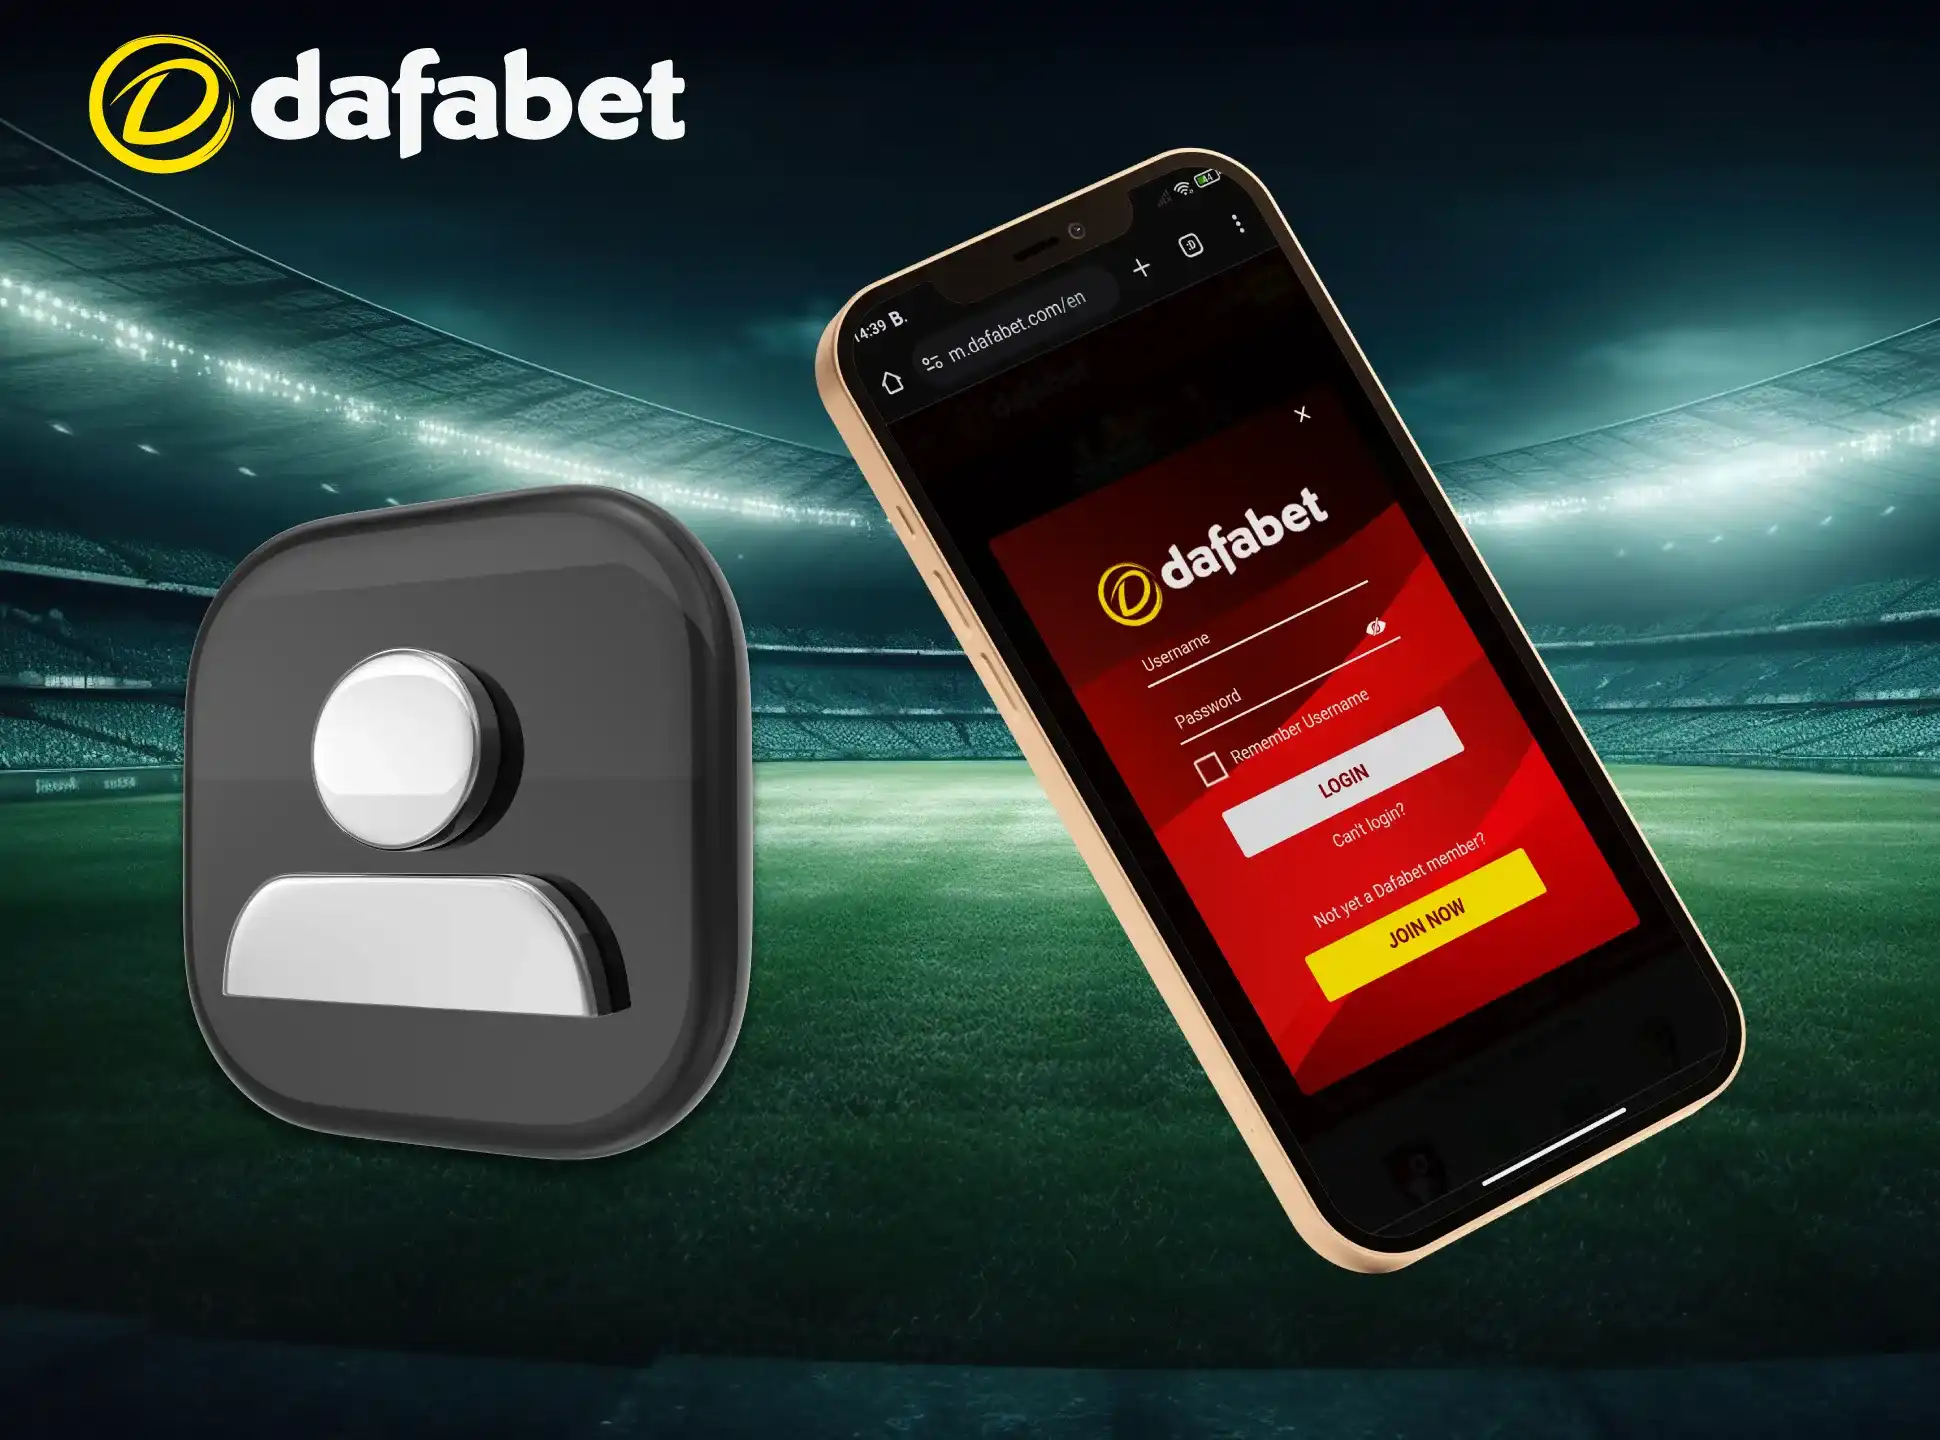 To log in to your Dafabet account, enter your login password.